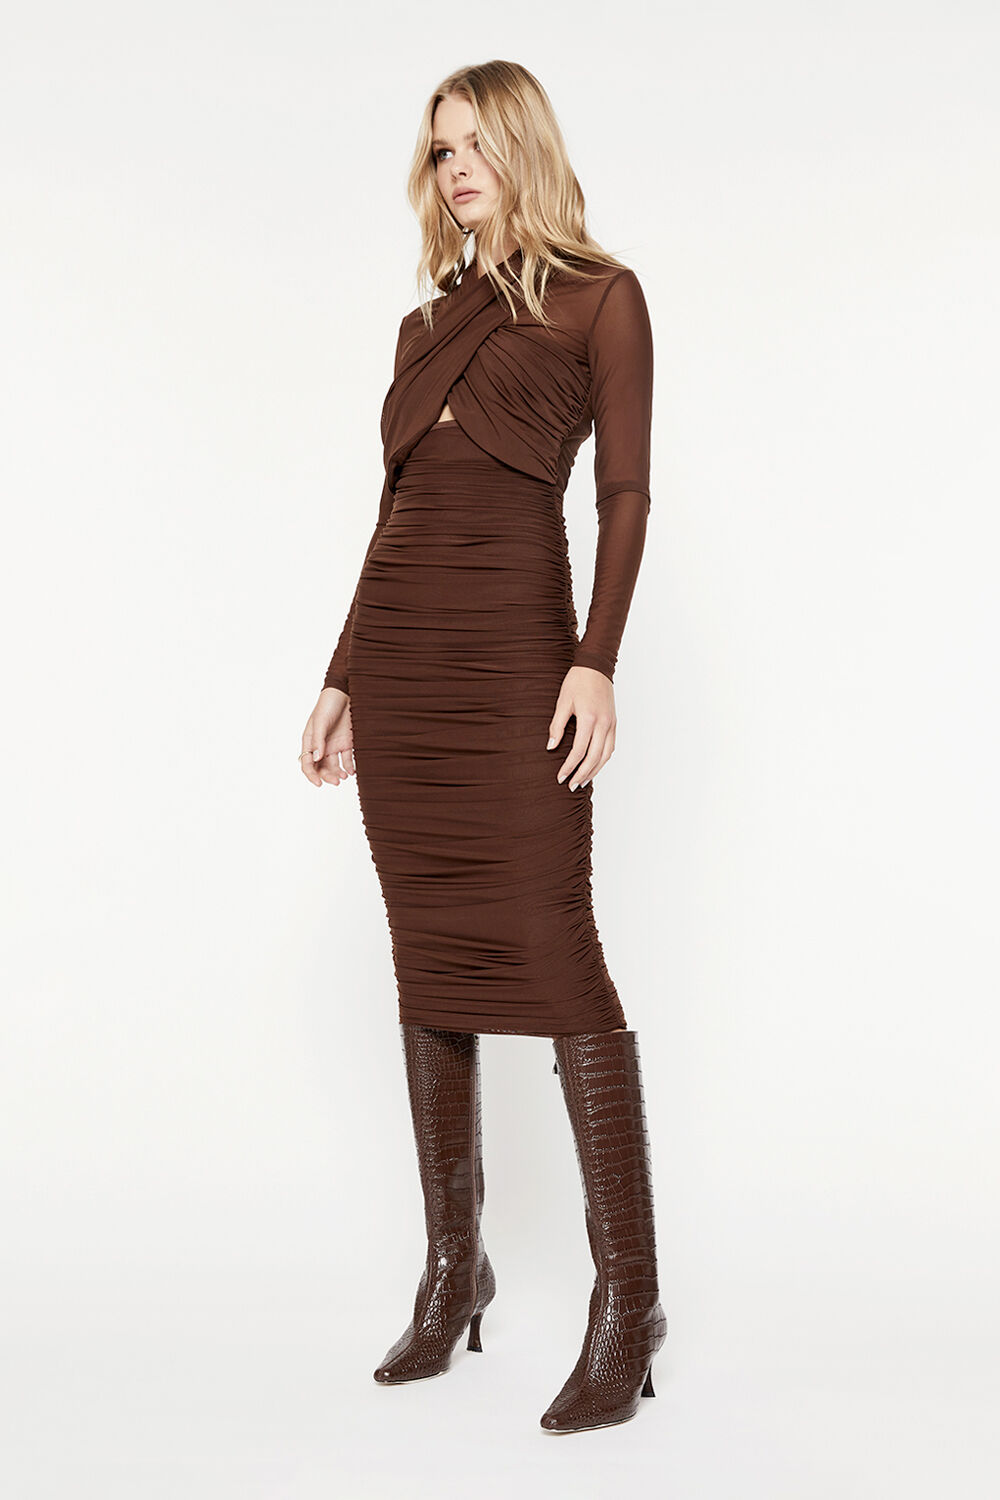 ALIYAH DRESS in colour CHOCOLATE BROWN